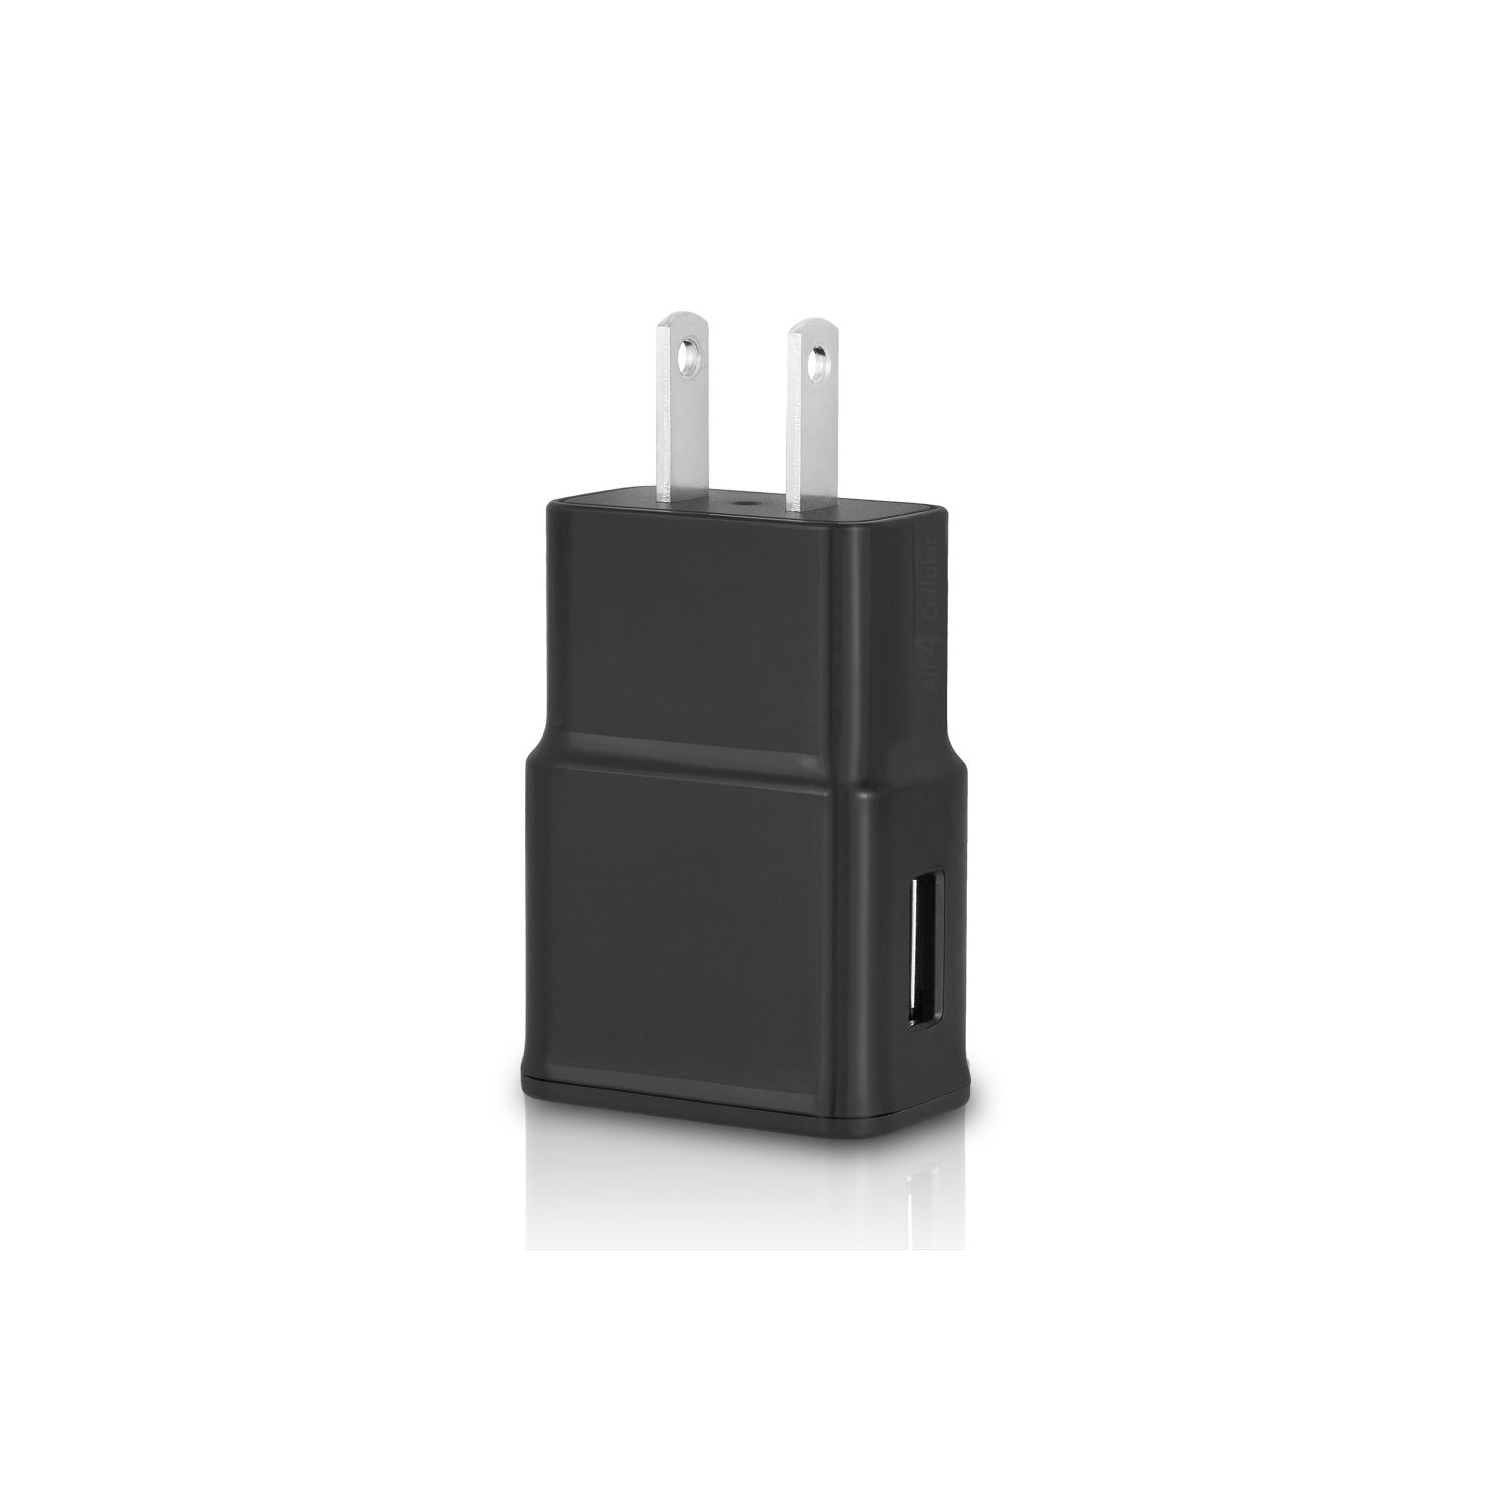 2.0A Wall Travel Charger for Samsung Galaxy S3 S4 / Note 2 3 or Other Smartphones, Black